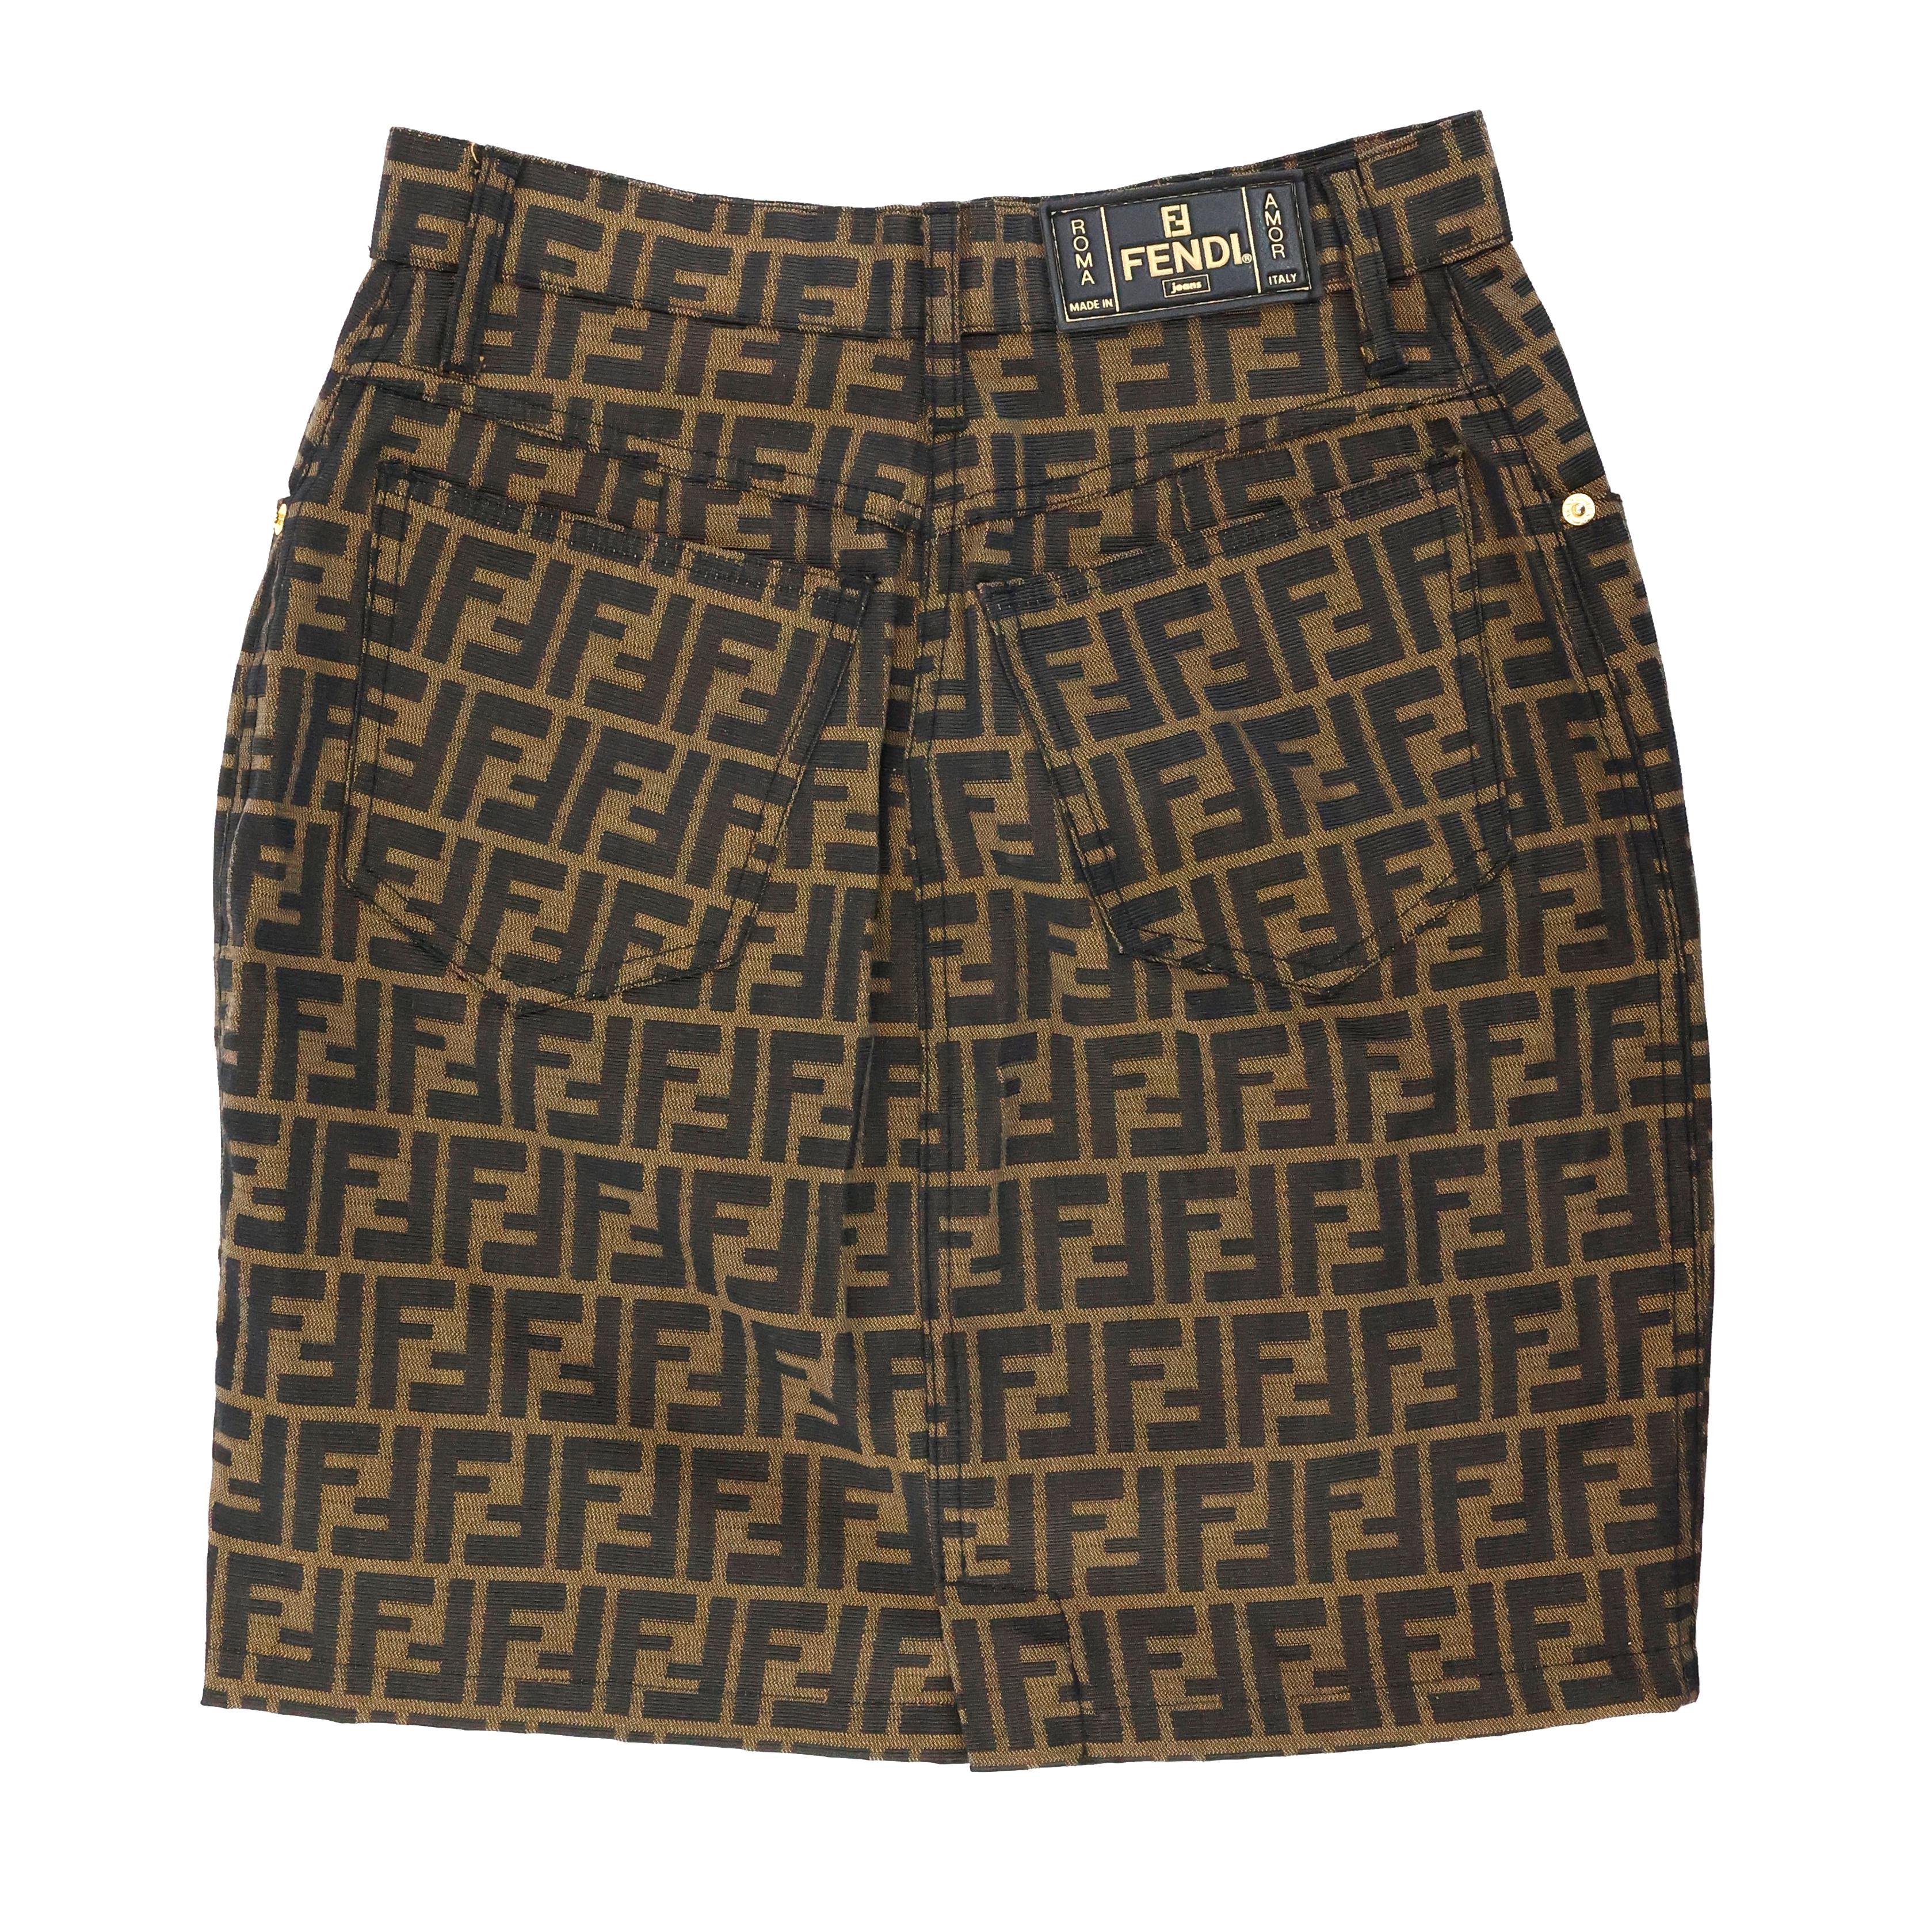 Fendi skirt in brown zucca monogrammed jeans, size 44 IT.


Condition:
Excellent.